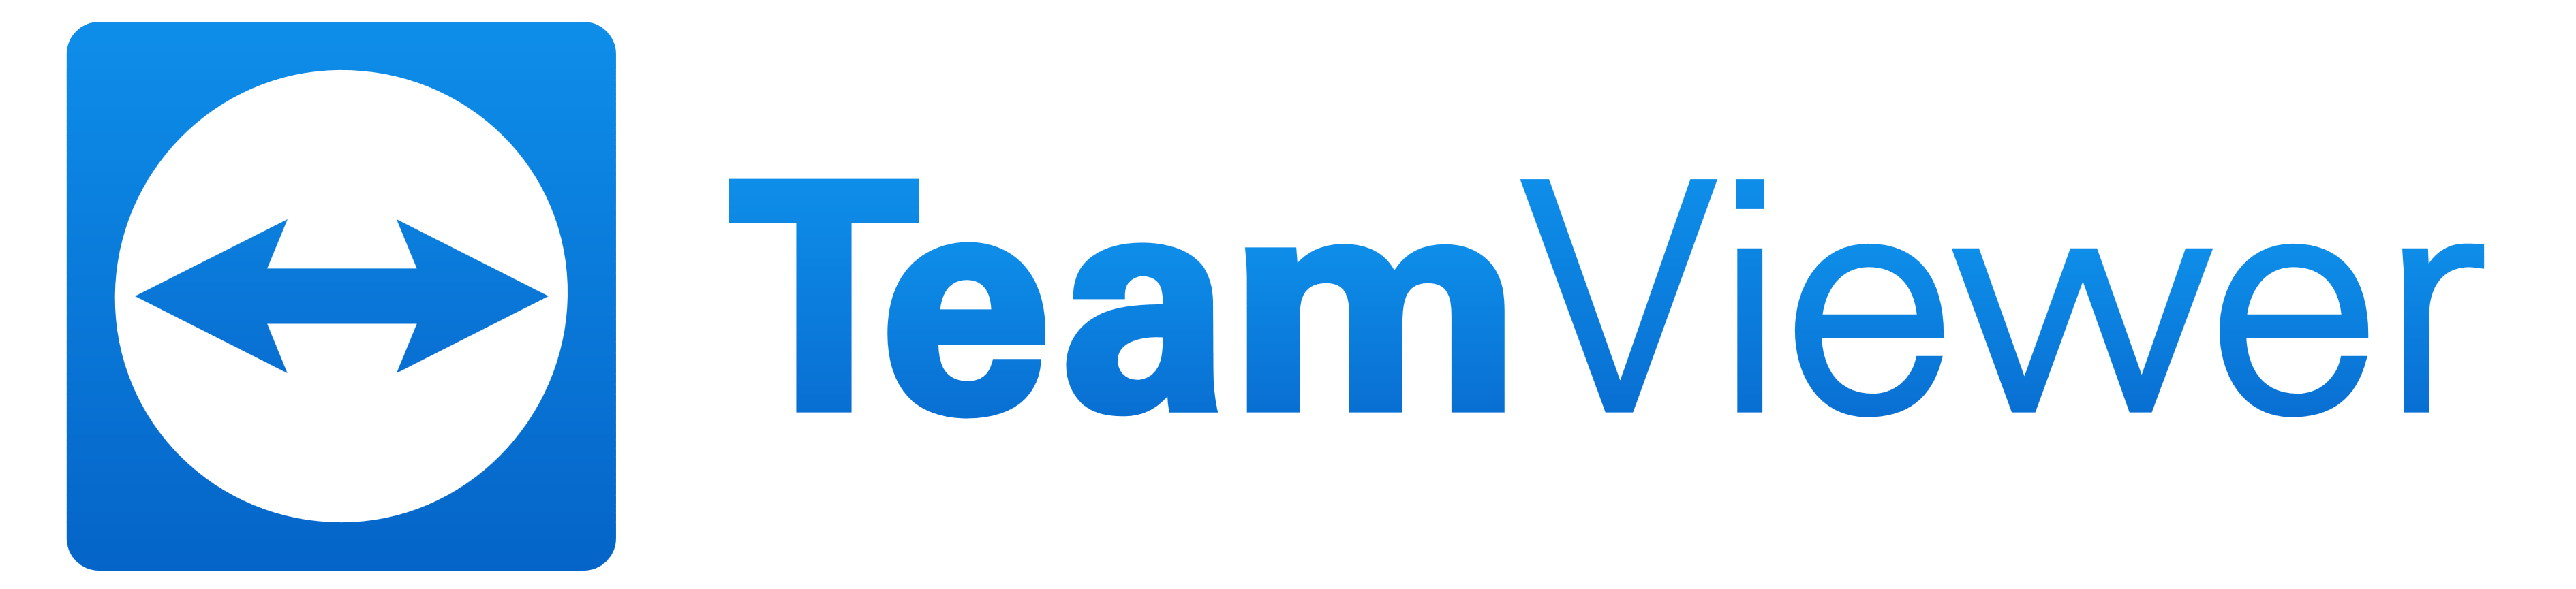 teamviewer logs out user